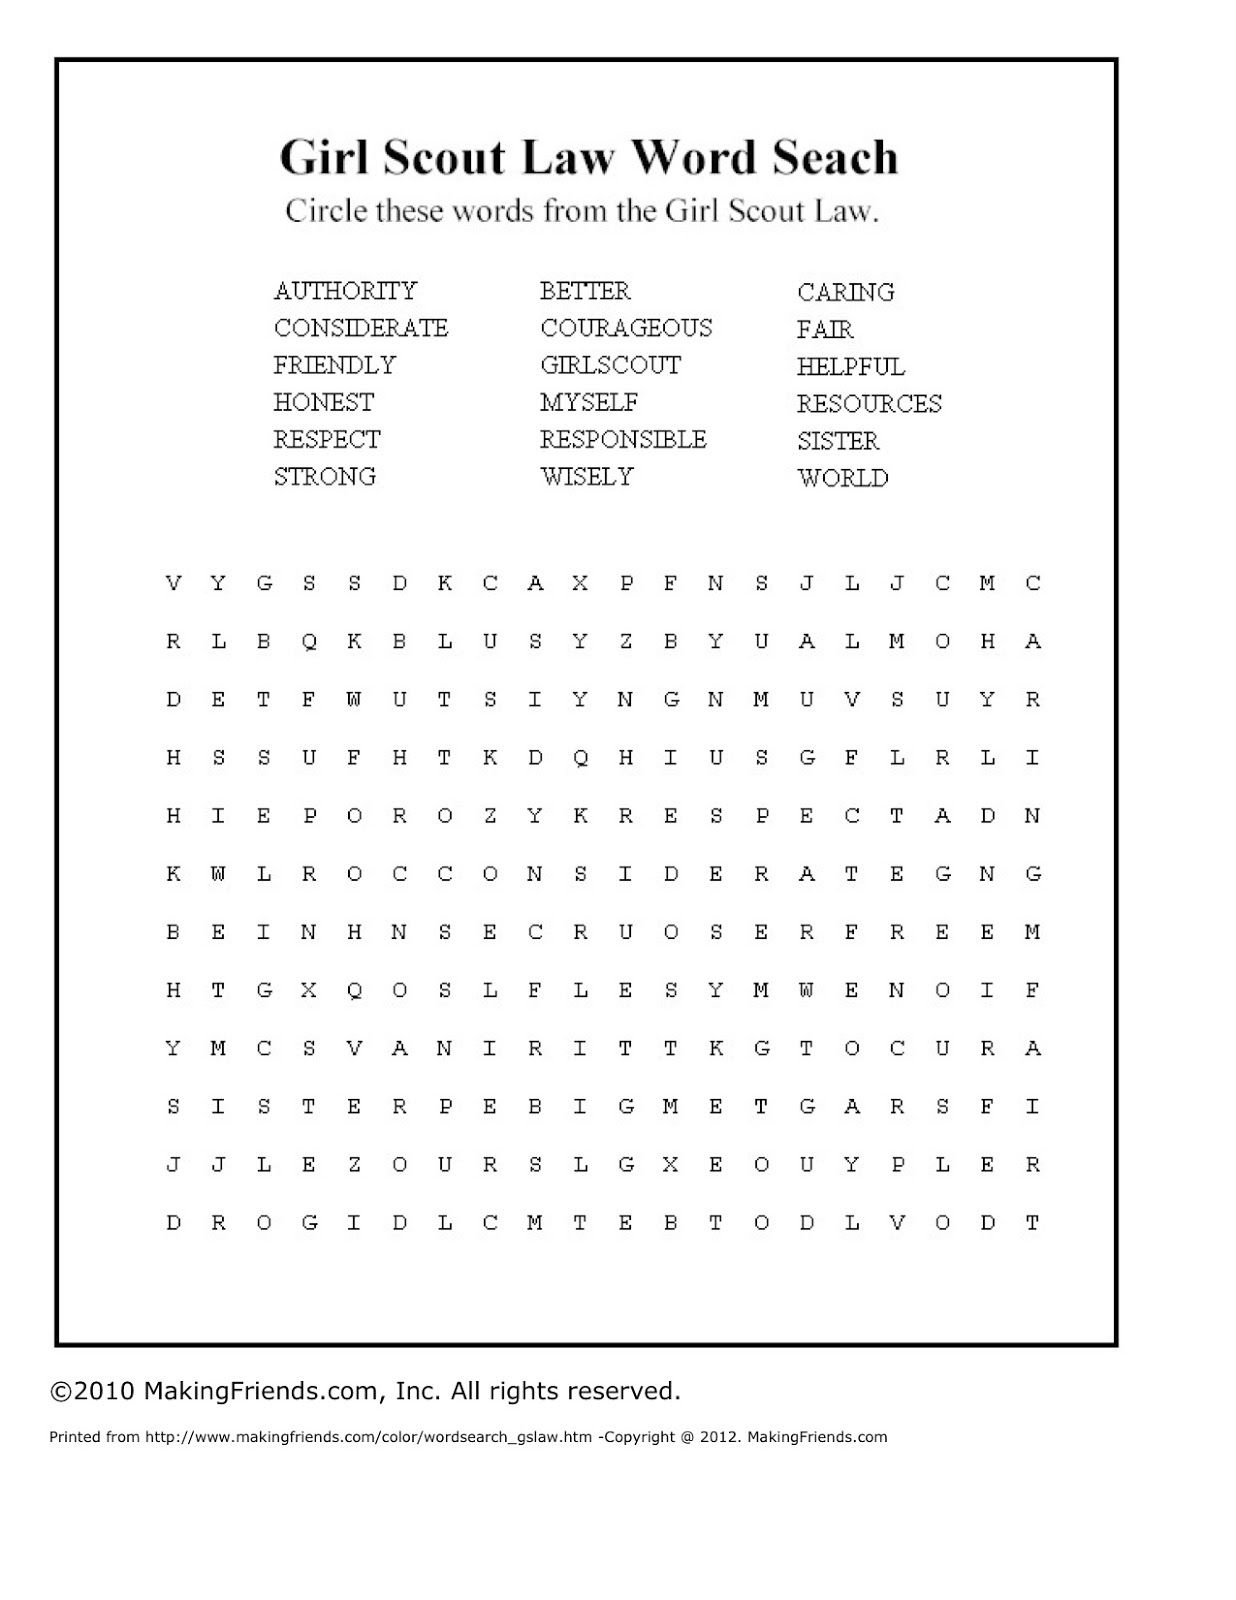 Girl Scout Manners Sheet: Girl Scout Law Word Search: Gs